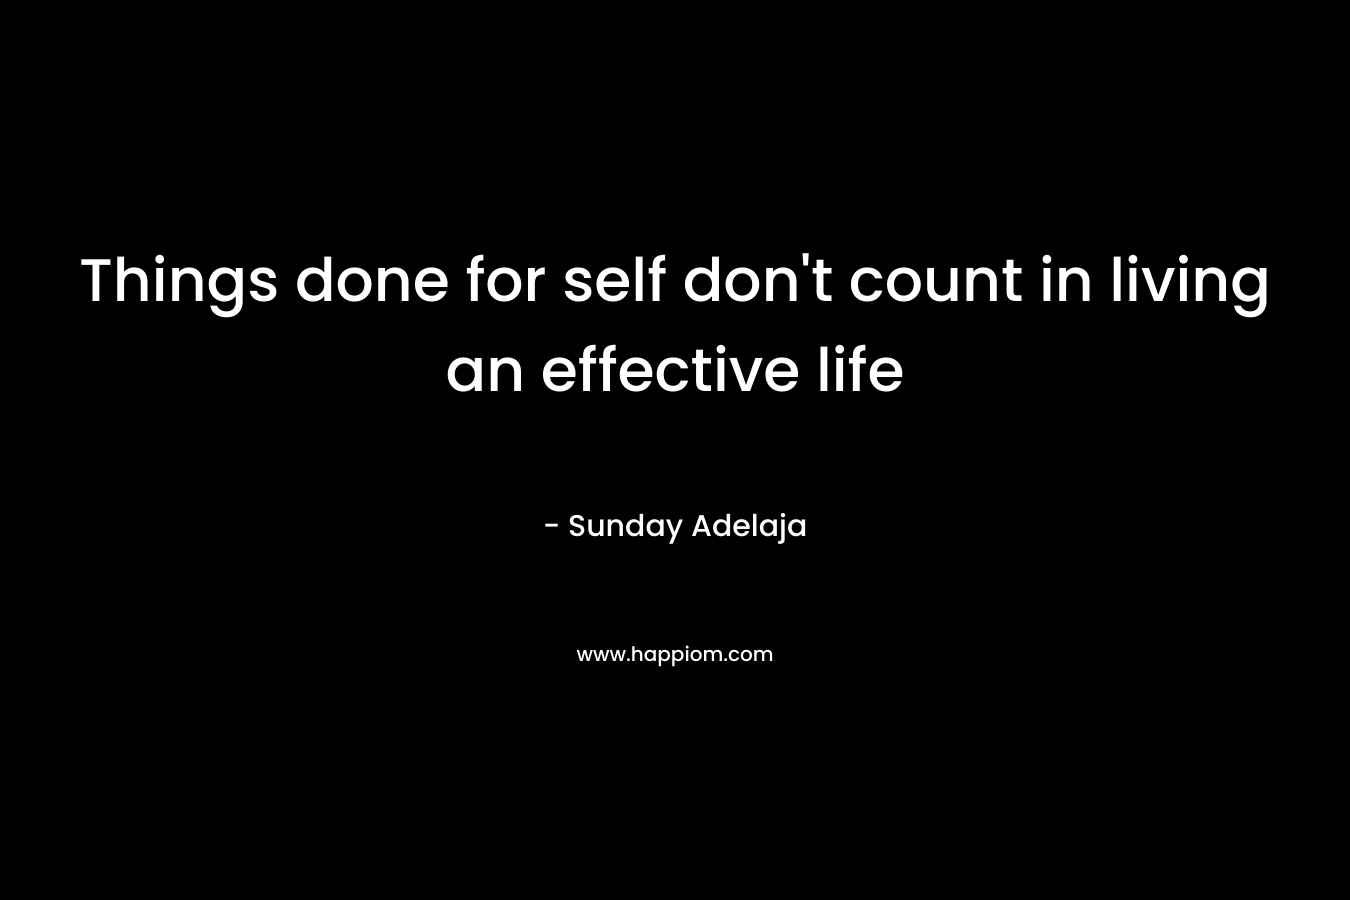 Things done for self don't count in living an effective life